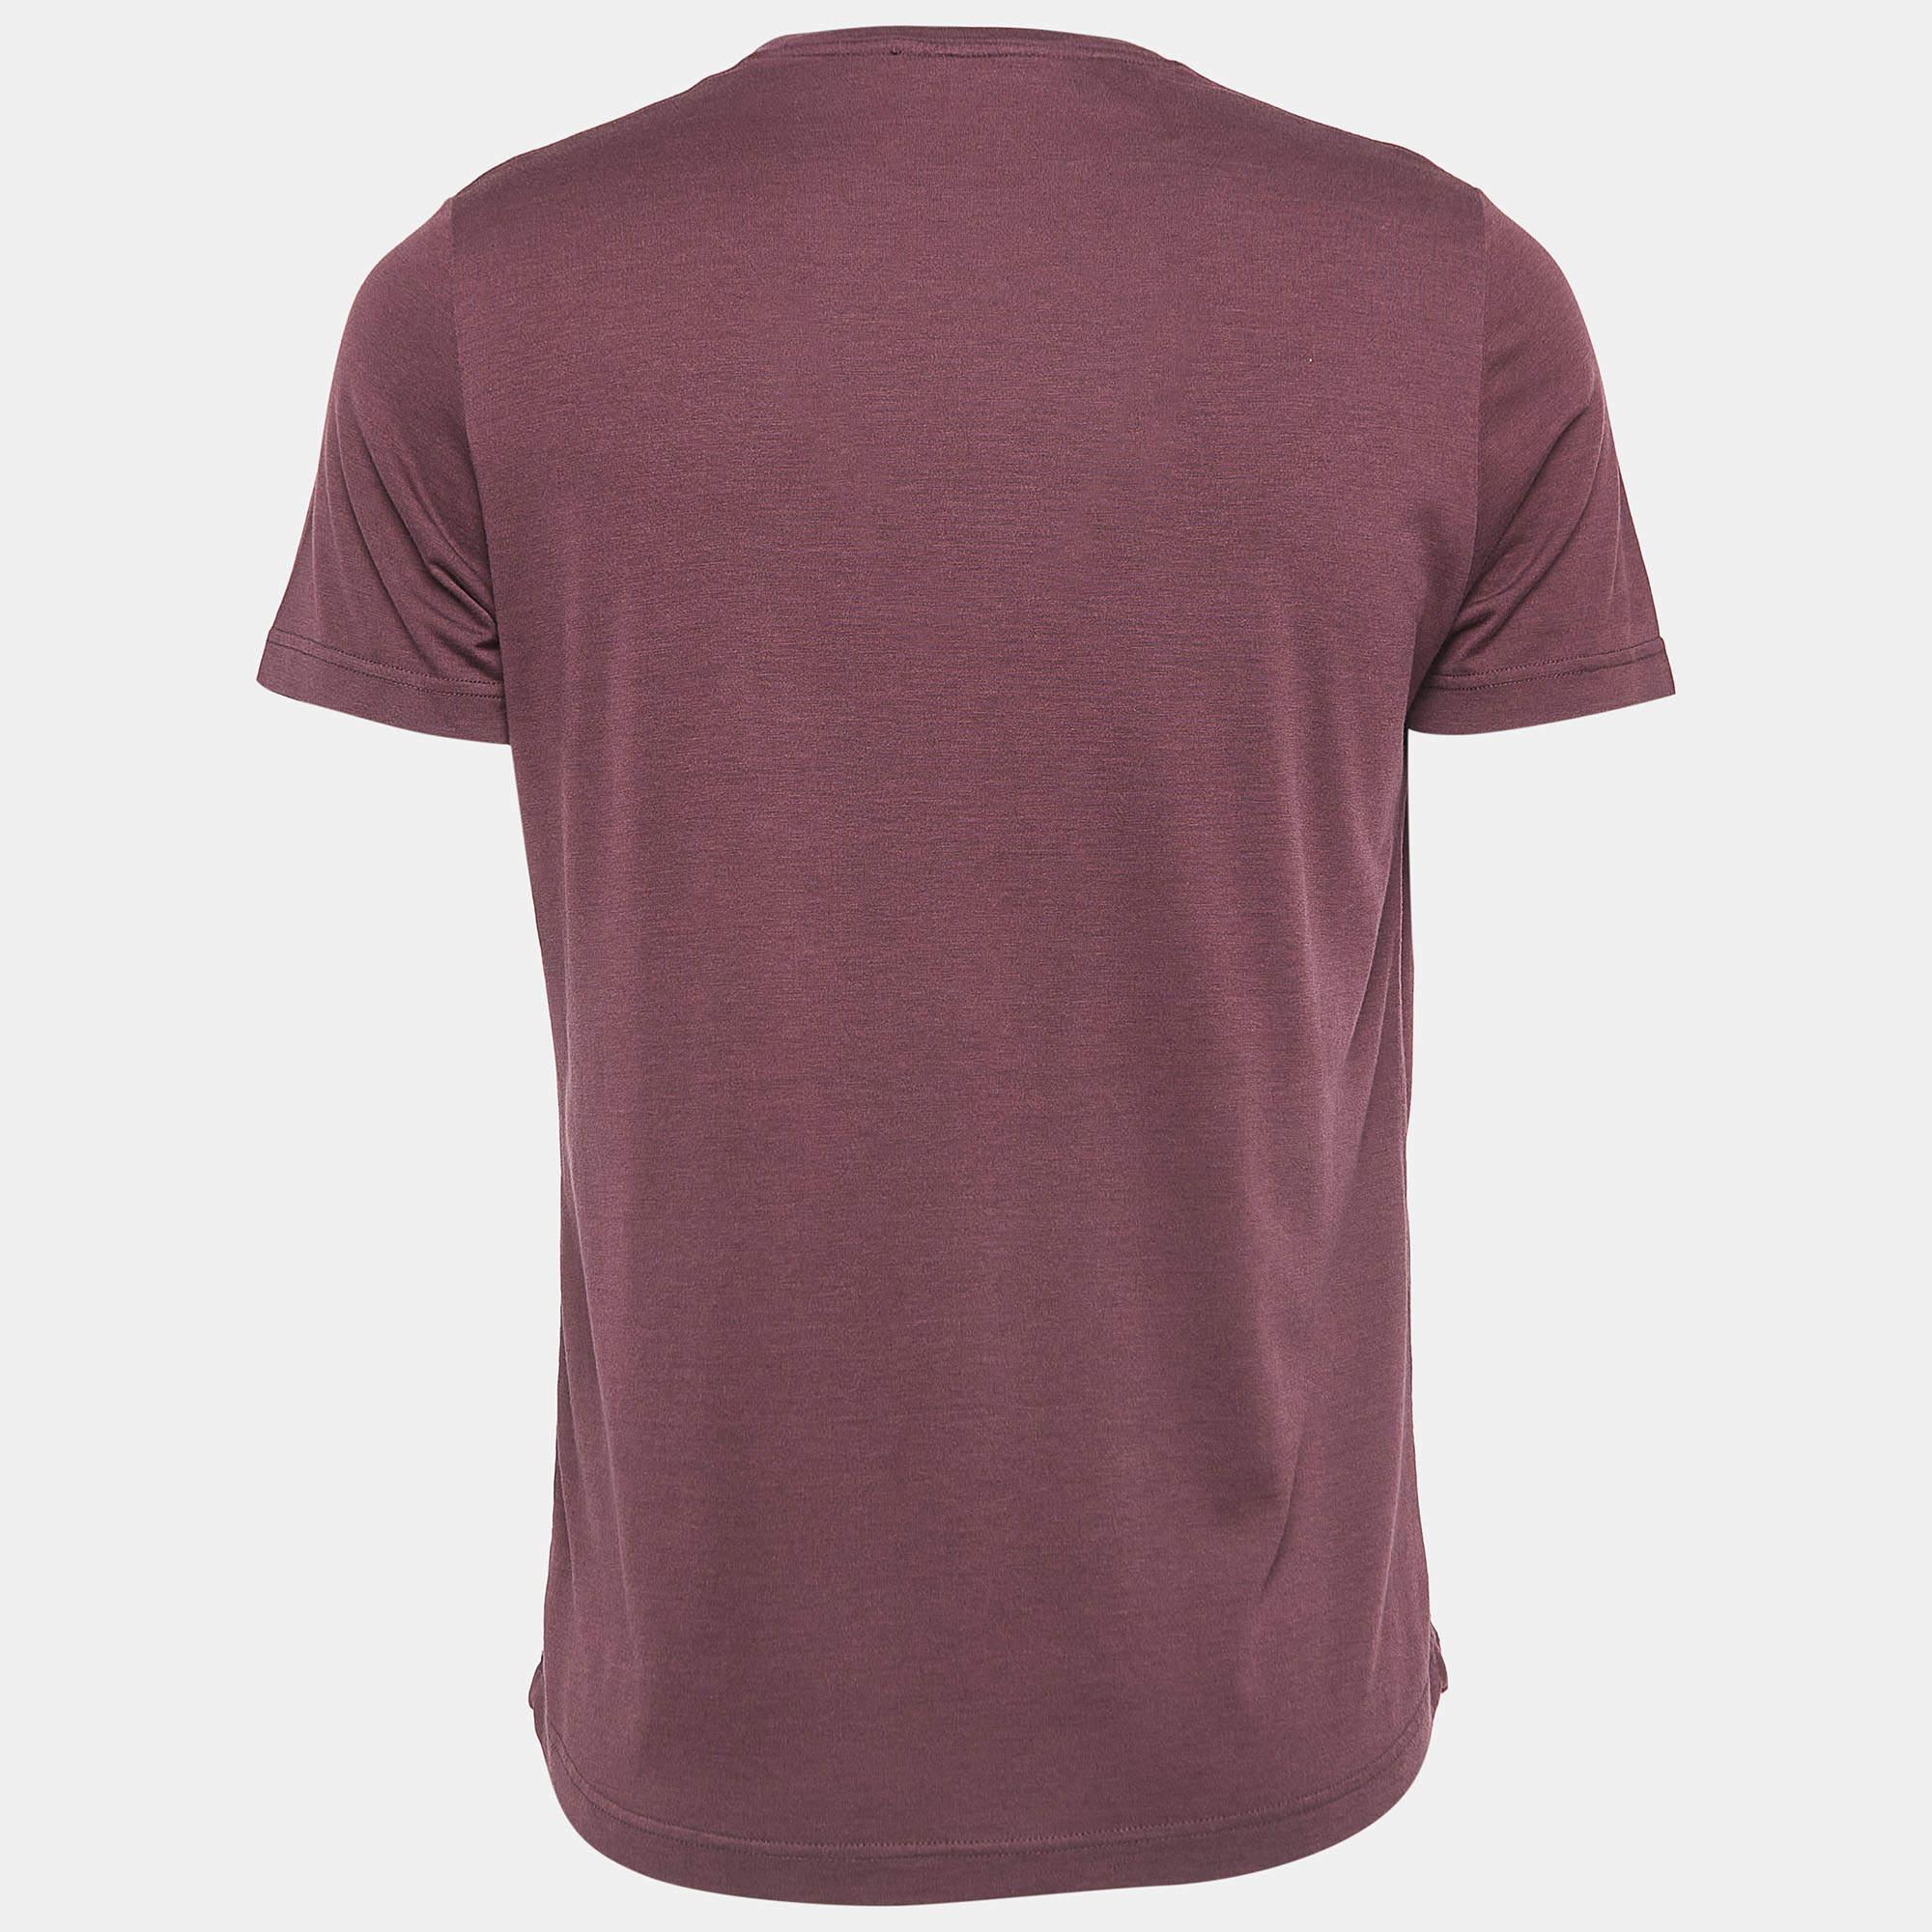 If you wish to build a sustainable closet with pieces that are minimal, versatile, and timeless, this Loro Piana t-shirt should be your choice. With a simple design, precise tailoring, and crew neck detail, it can be paired with anything!

